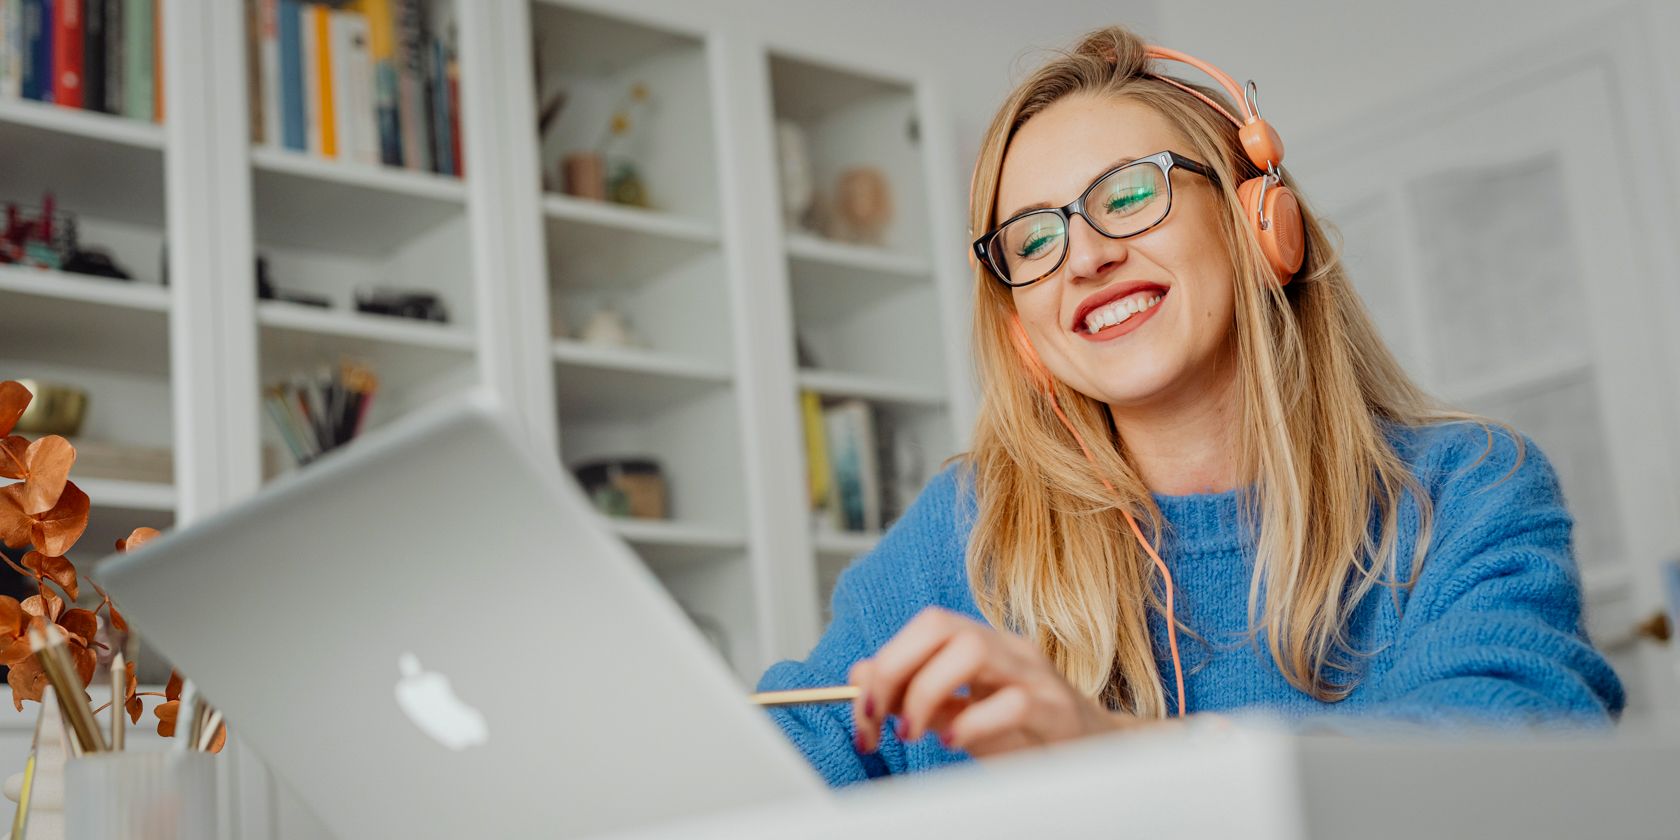 A happy woman listening to headphones while using a laptop